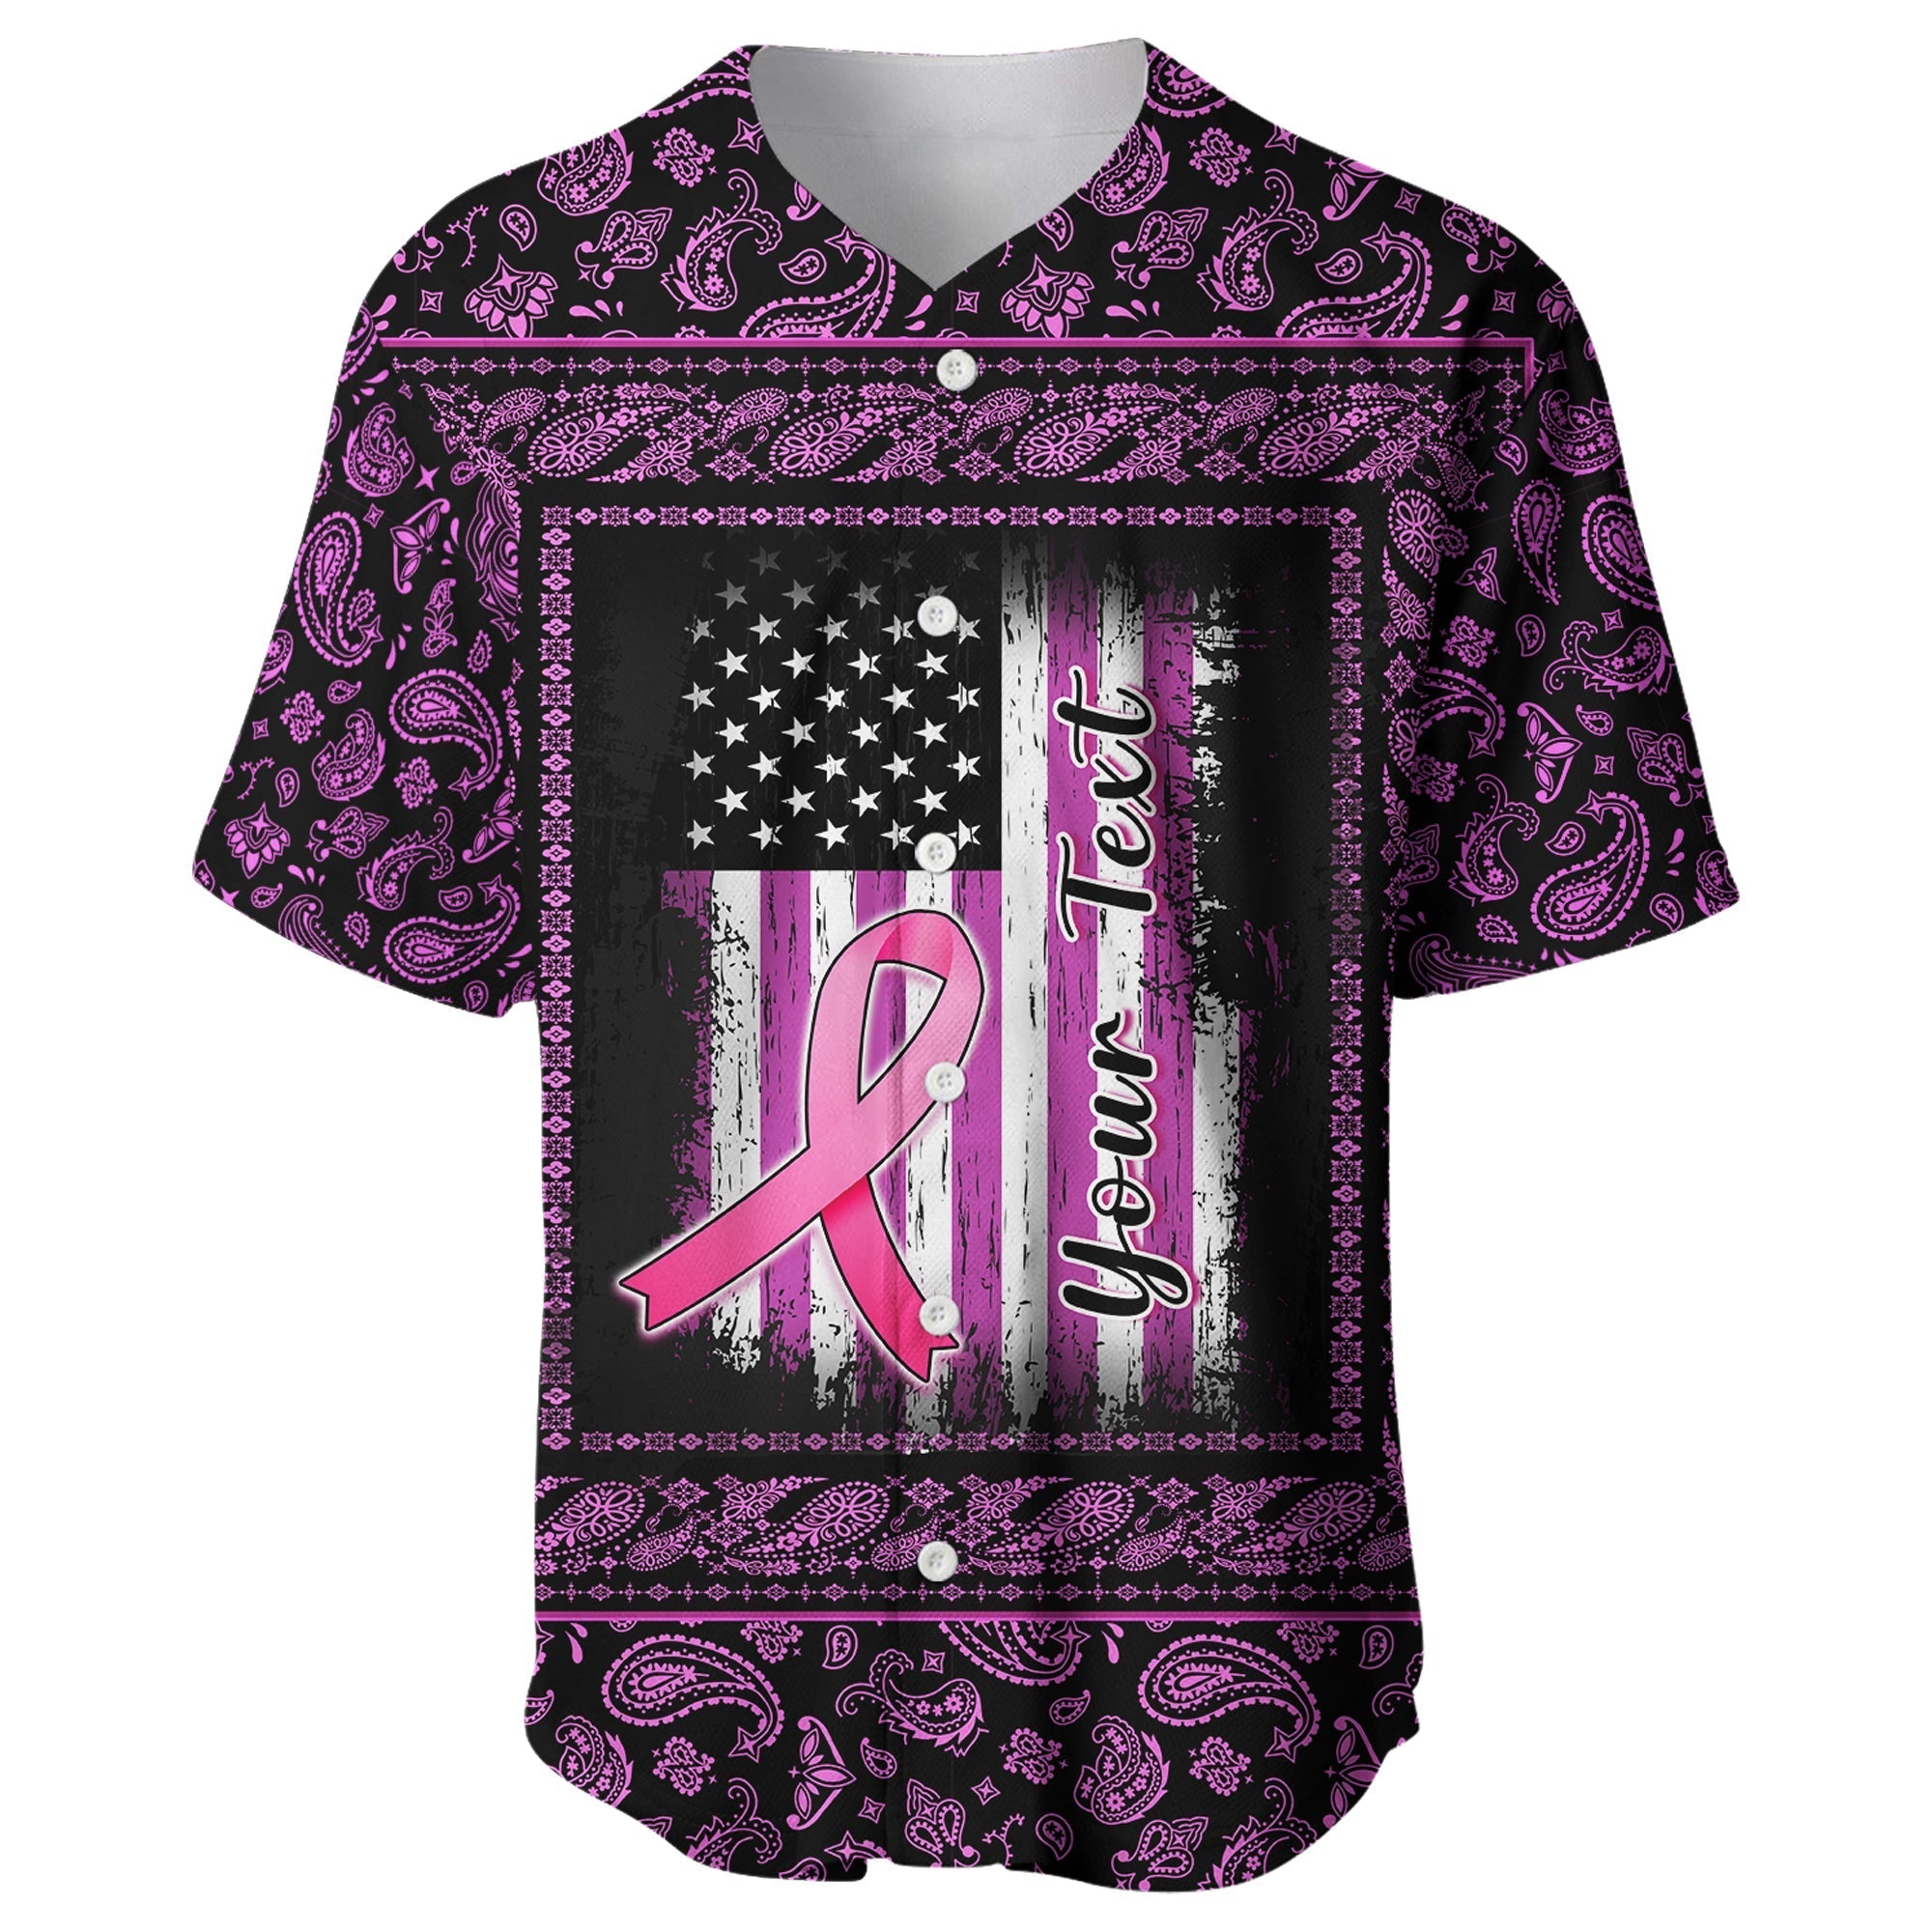 custom-personalised-breast-cancer-baseball-jersey-black-paisley-pattern-in-october-we-wear-pink